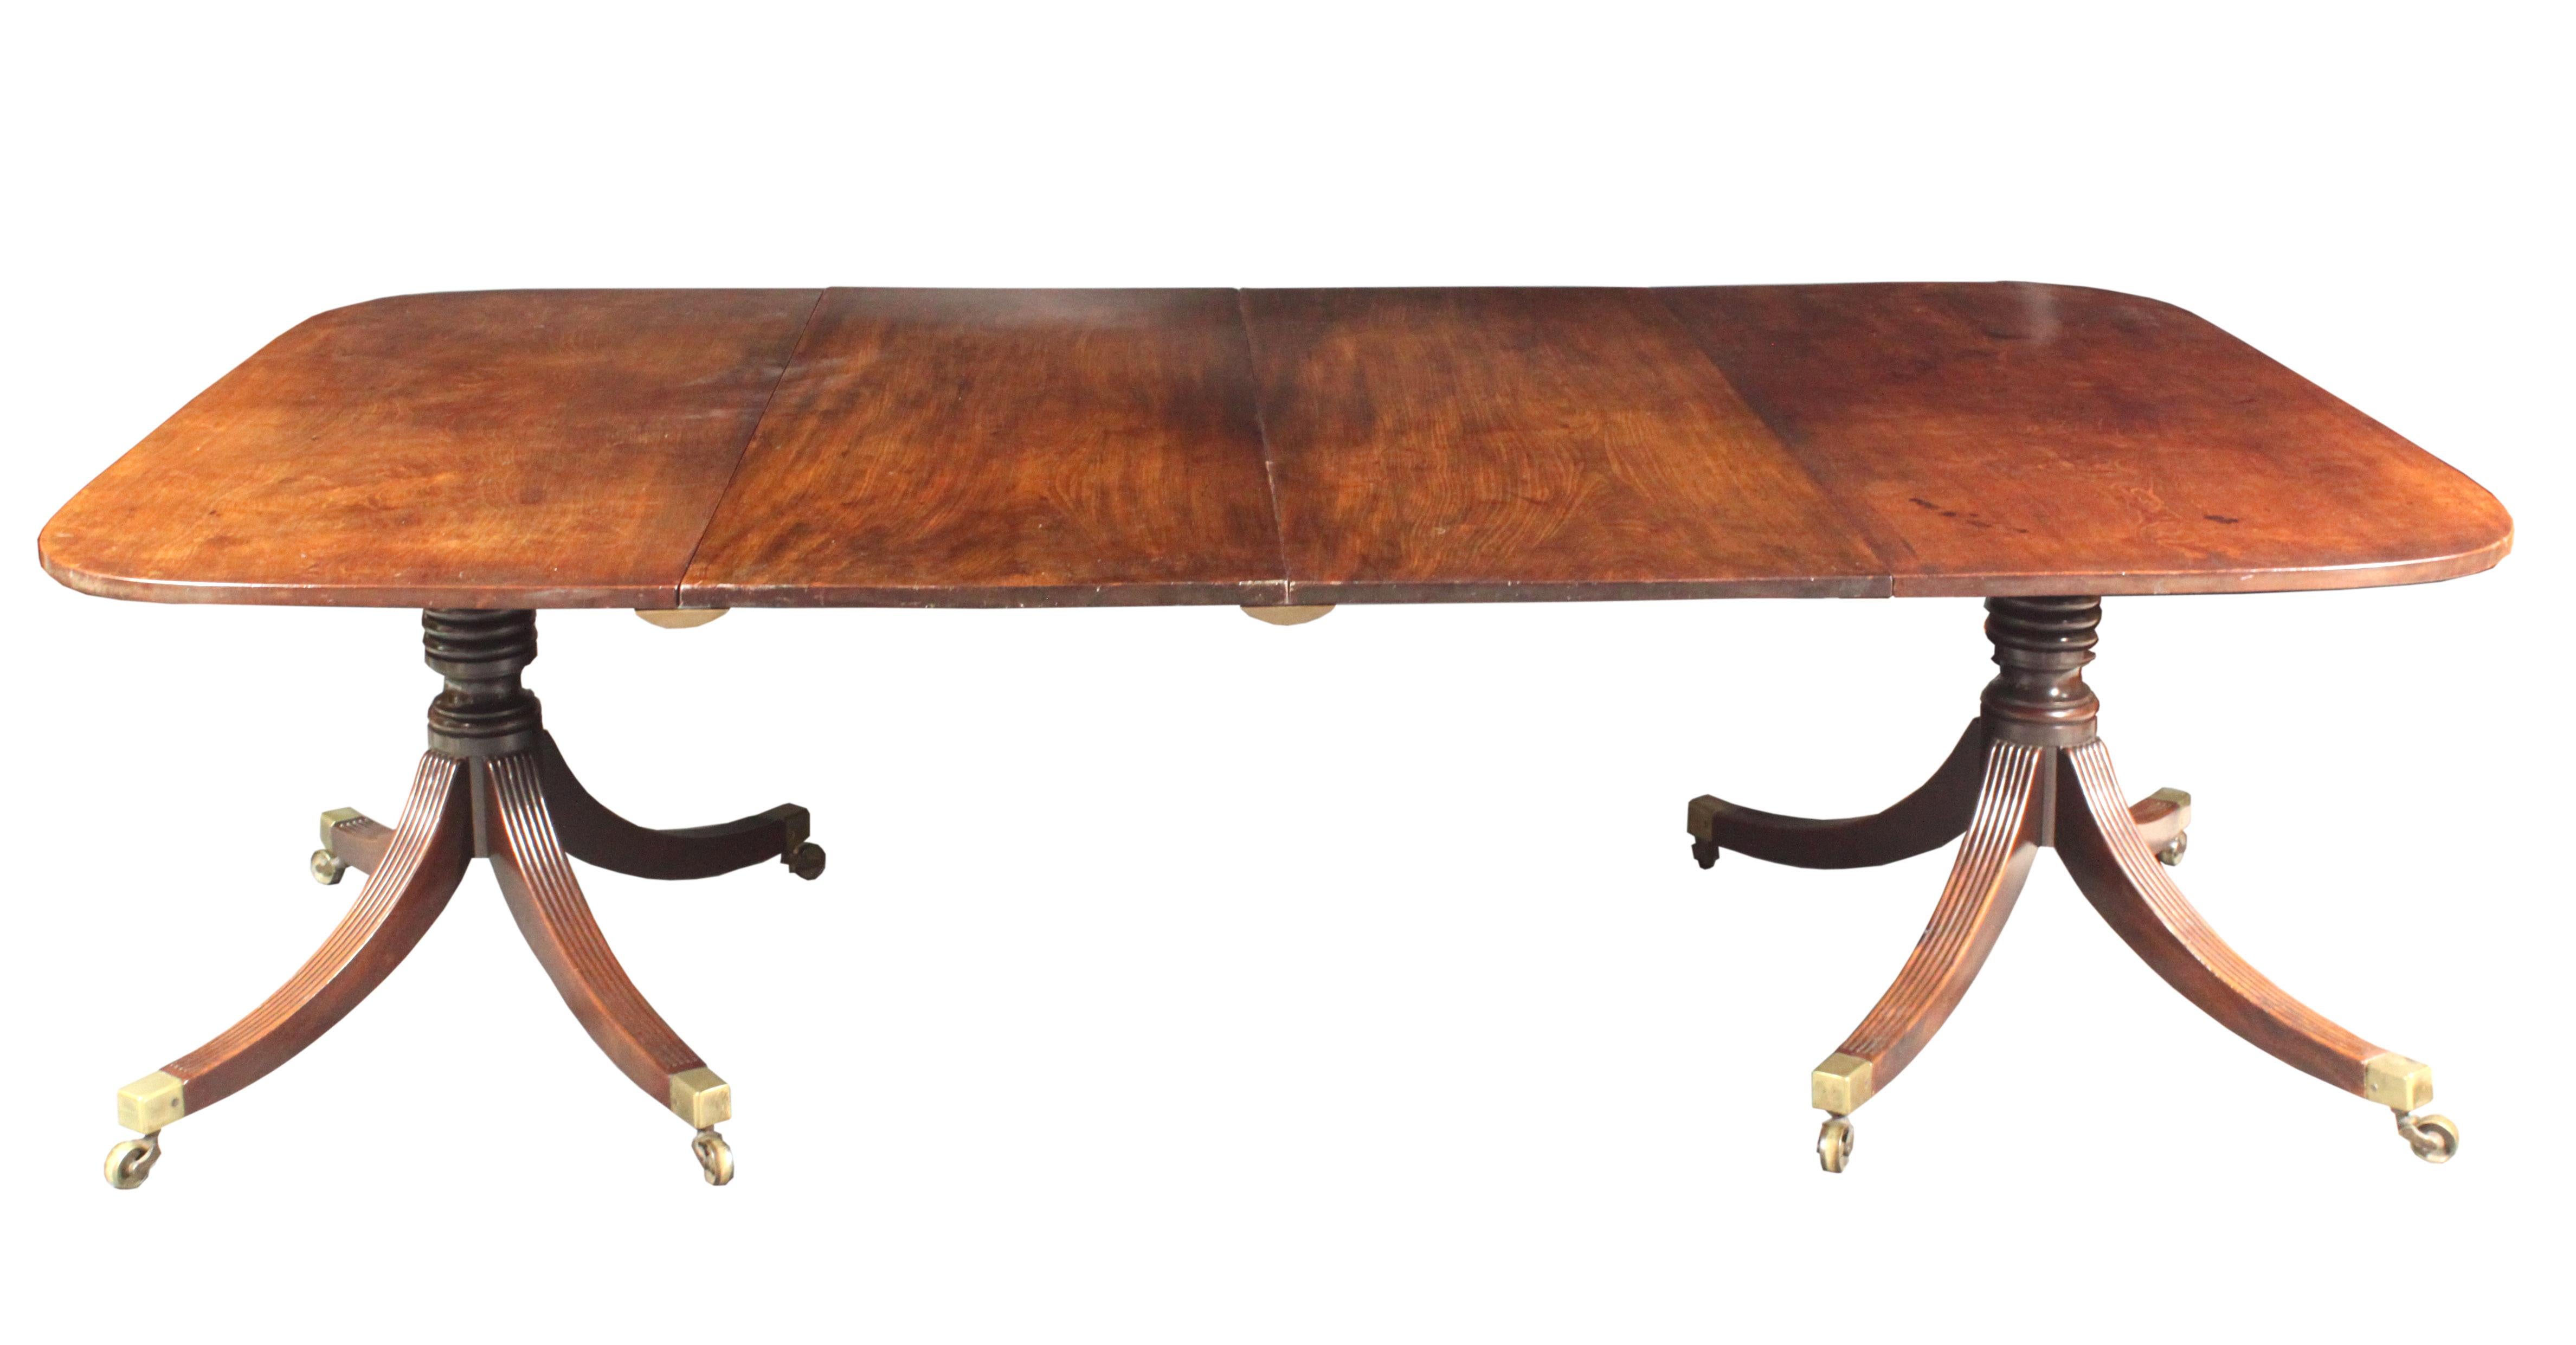 Georgian dining table in mahogany of a good rich color and patina on elegant twin pedestal four splay bases.
The two end tops and pillars are original; two centre leaves have been replaced in well matched Georgian timber and are supported by